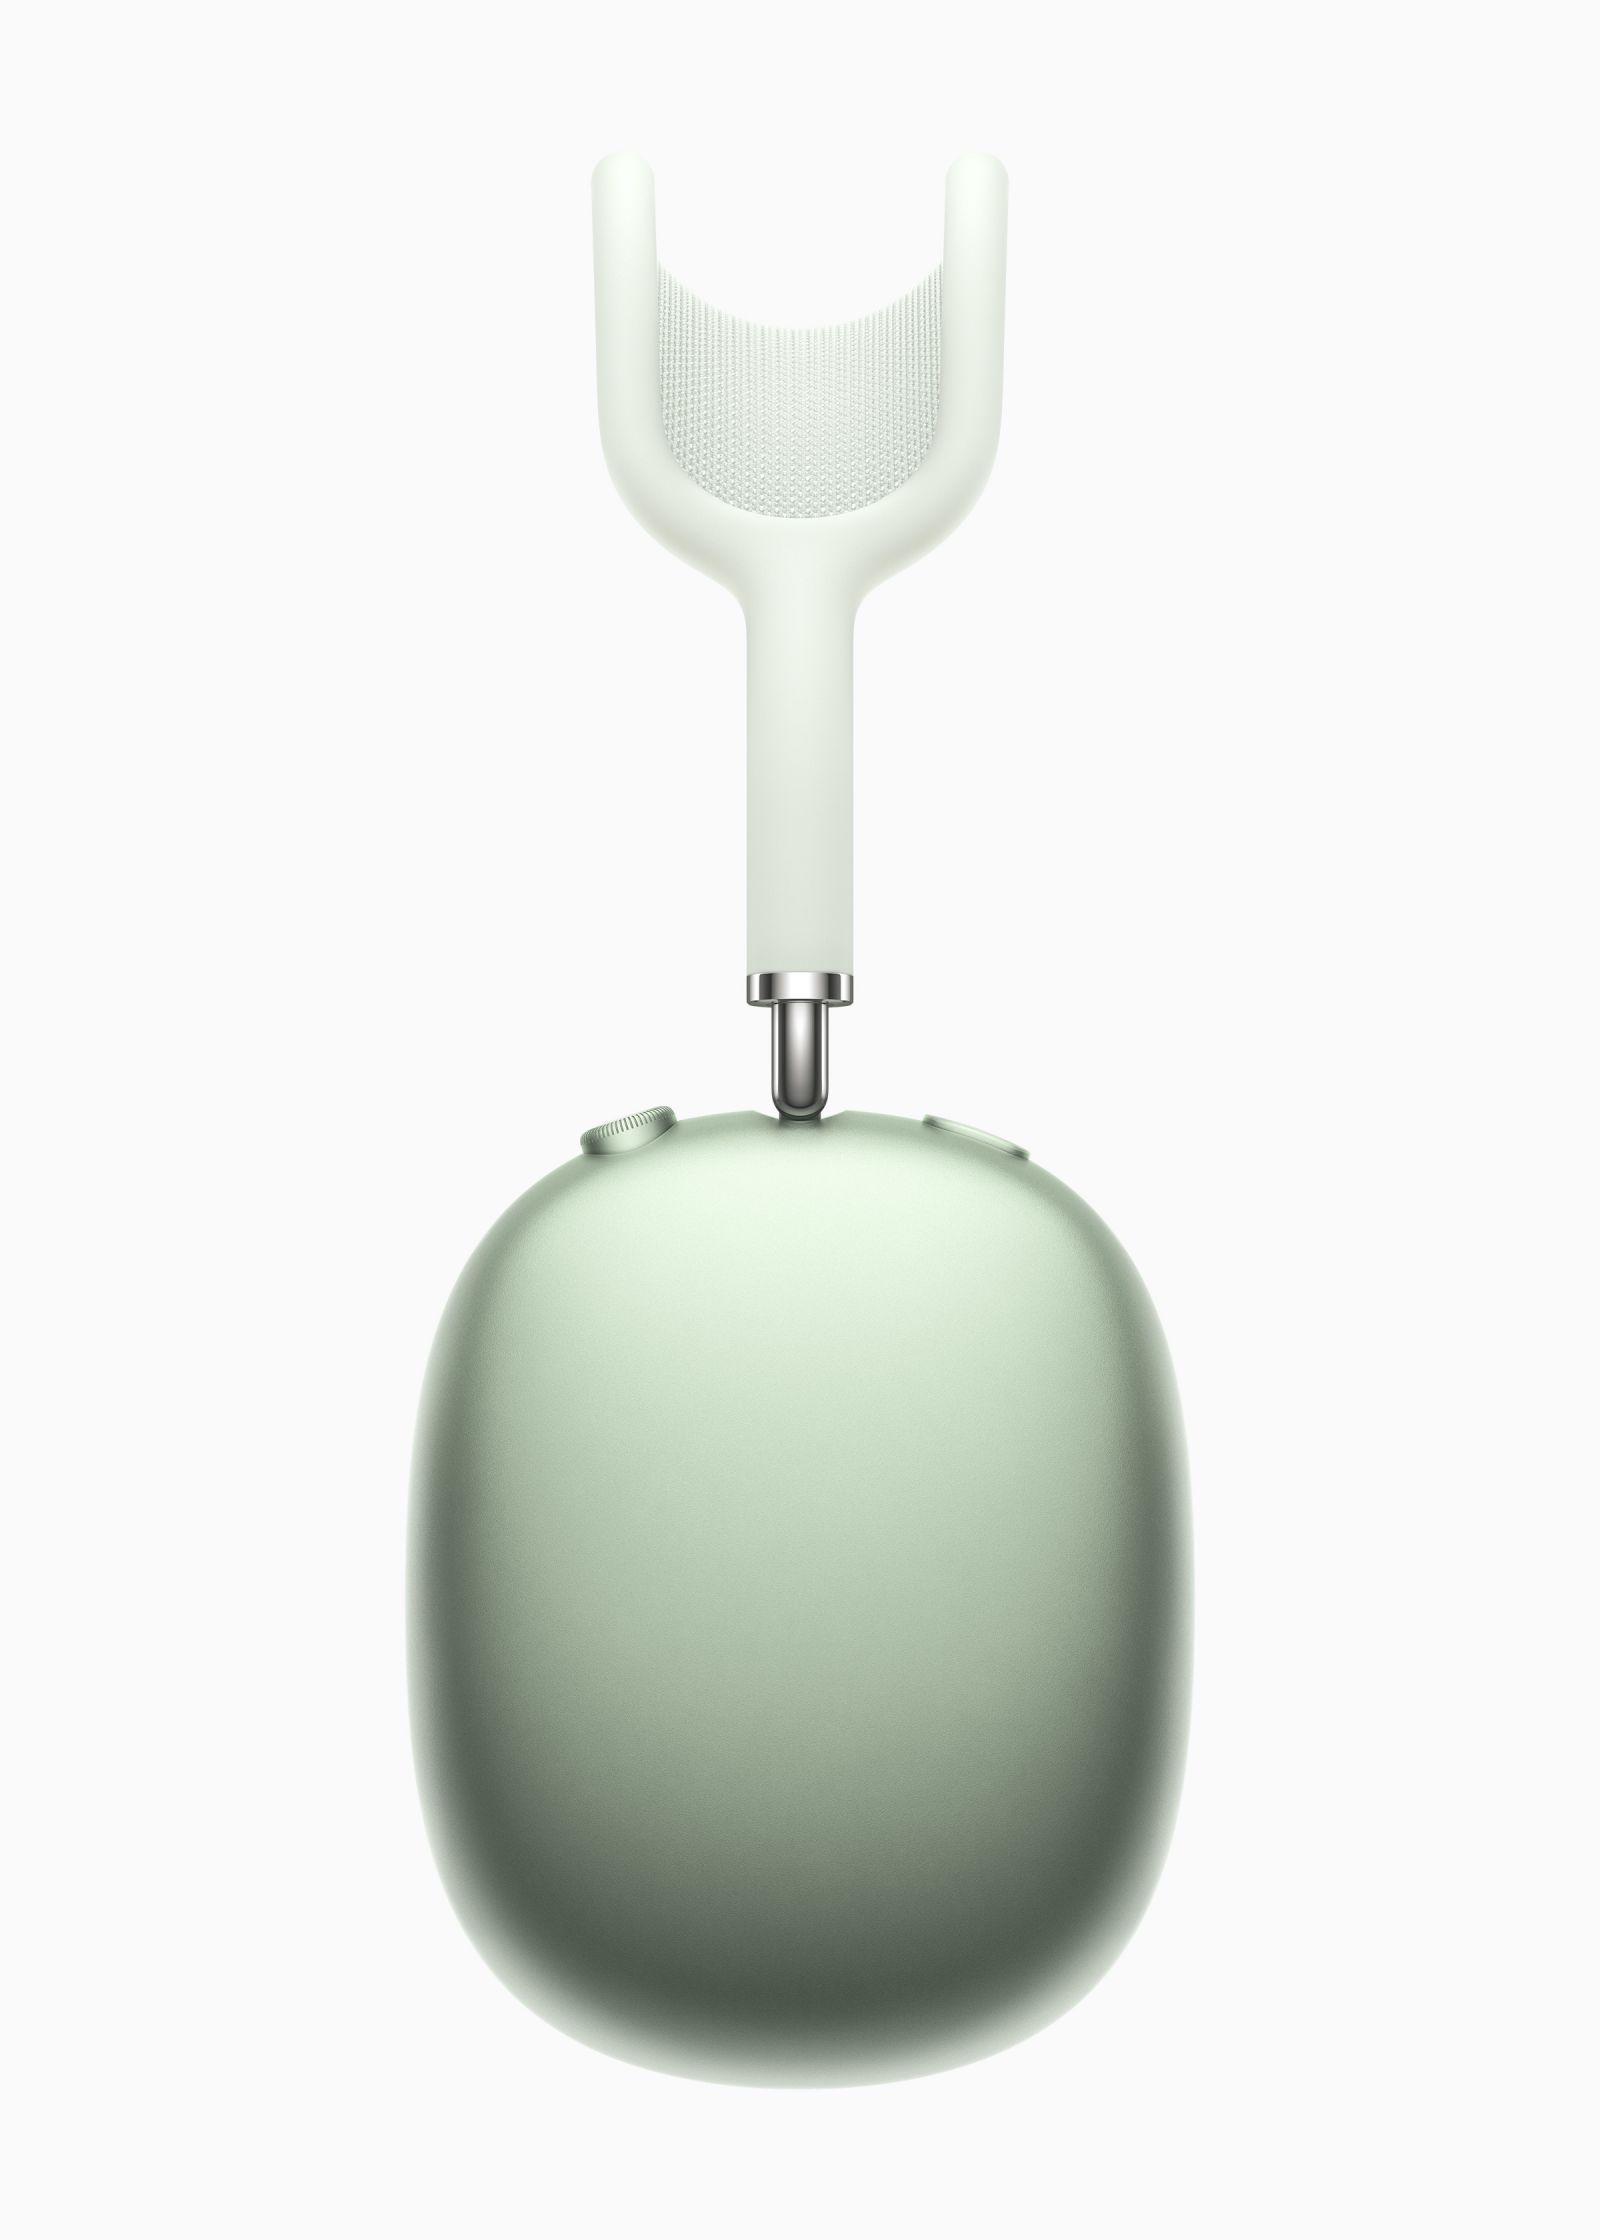 apple_airpods-max_color-green_12082020.jpg